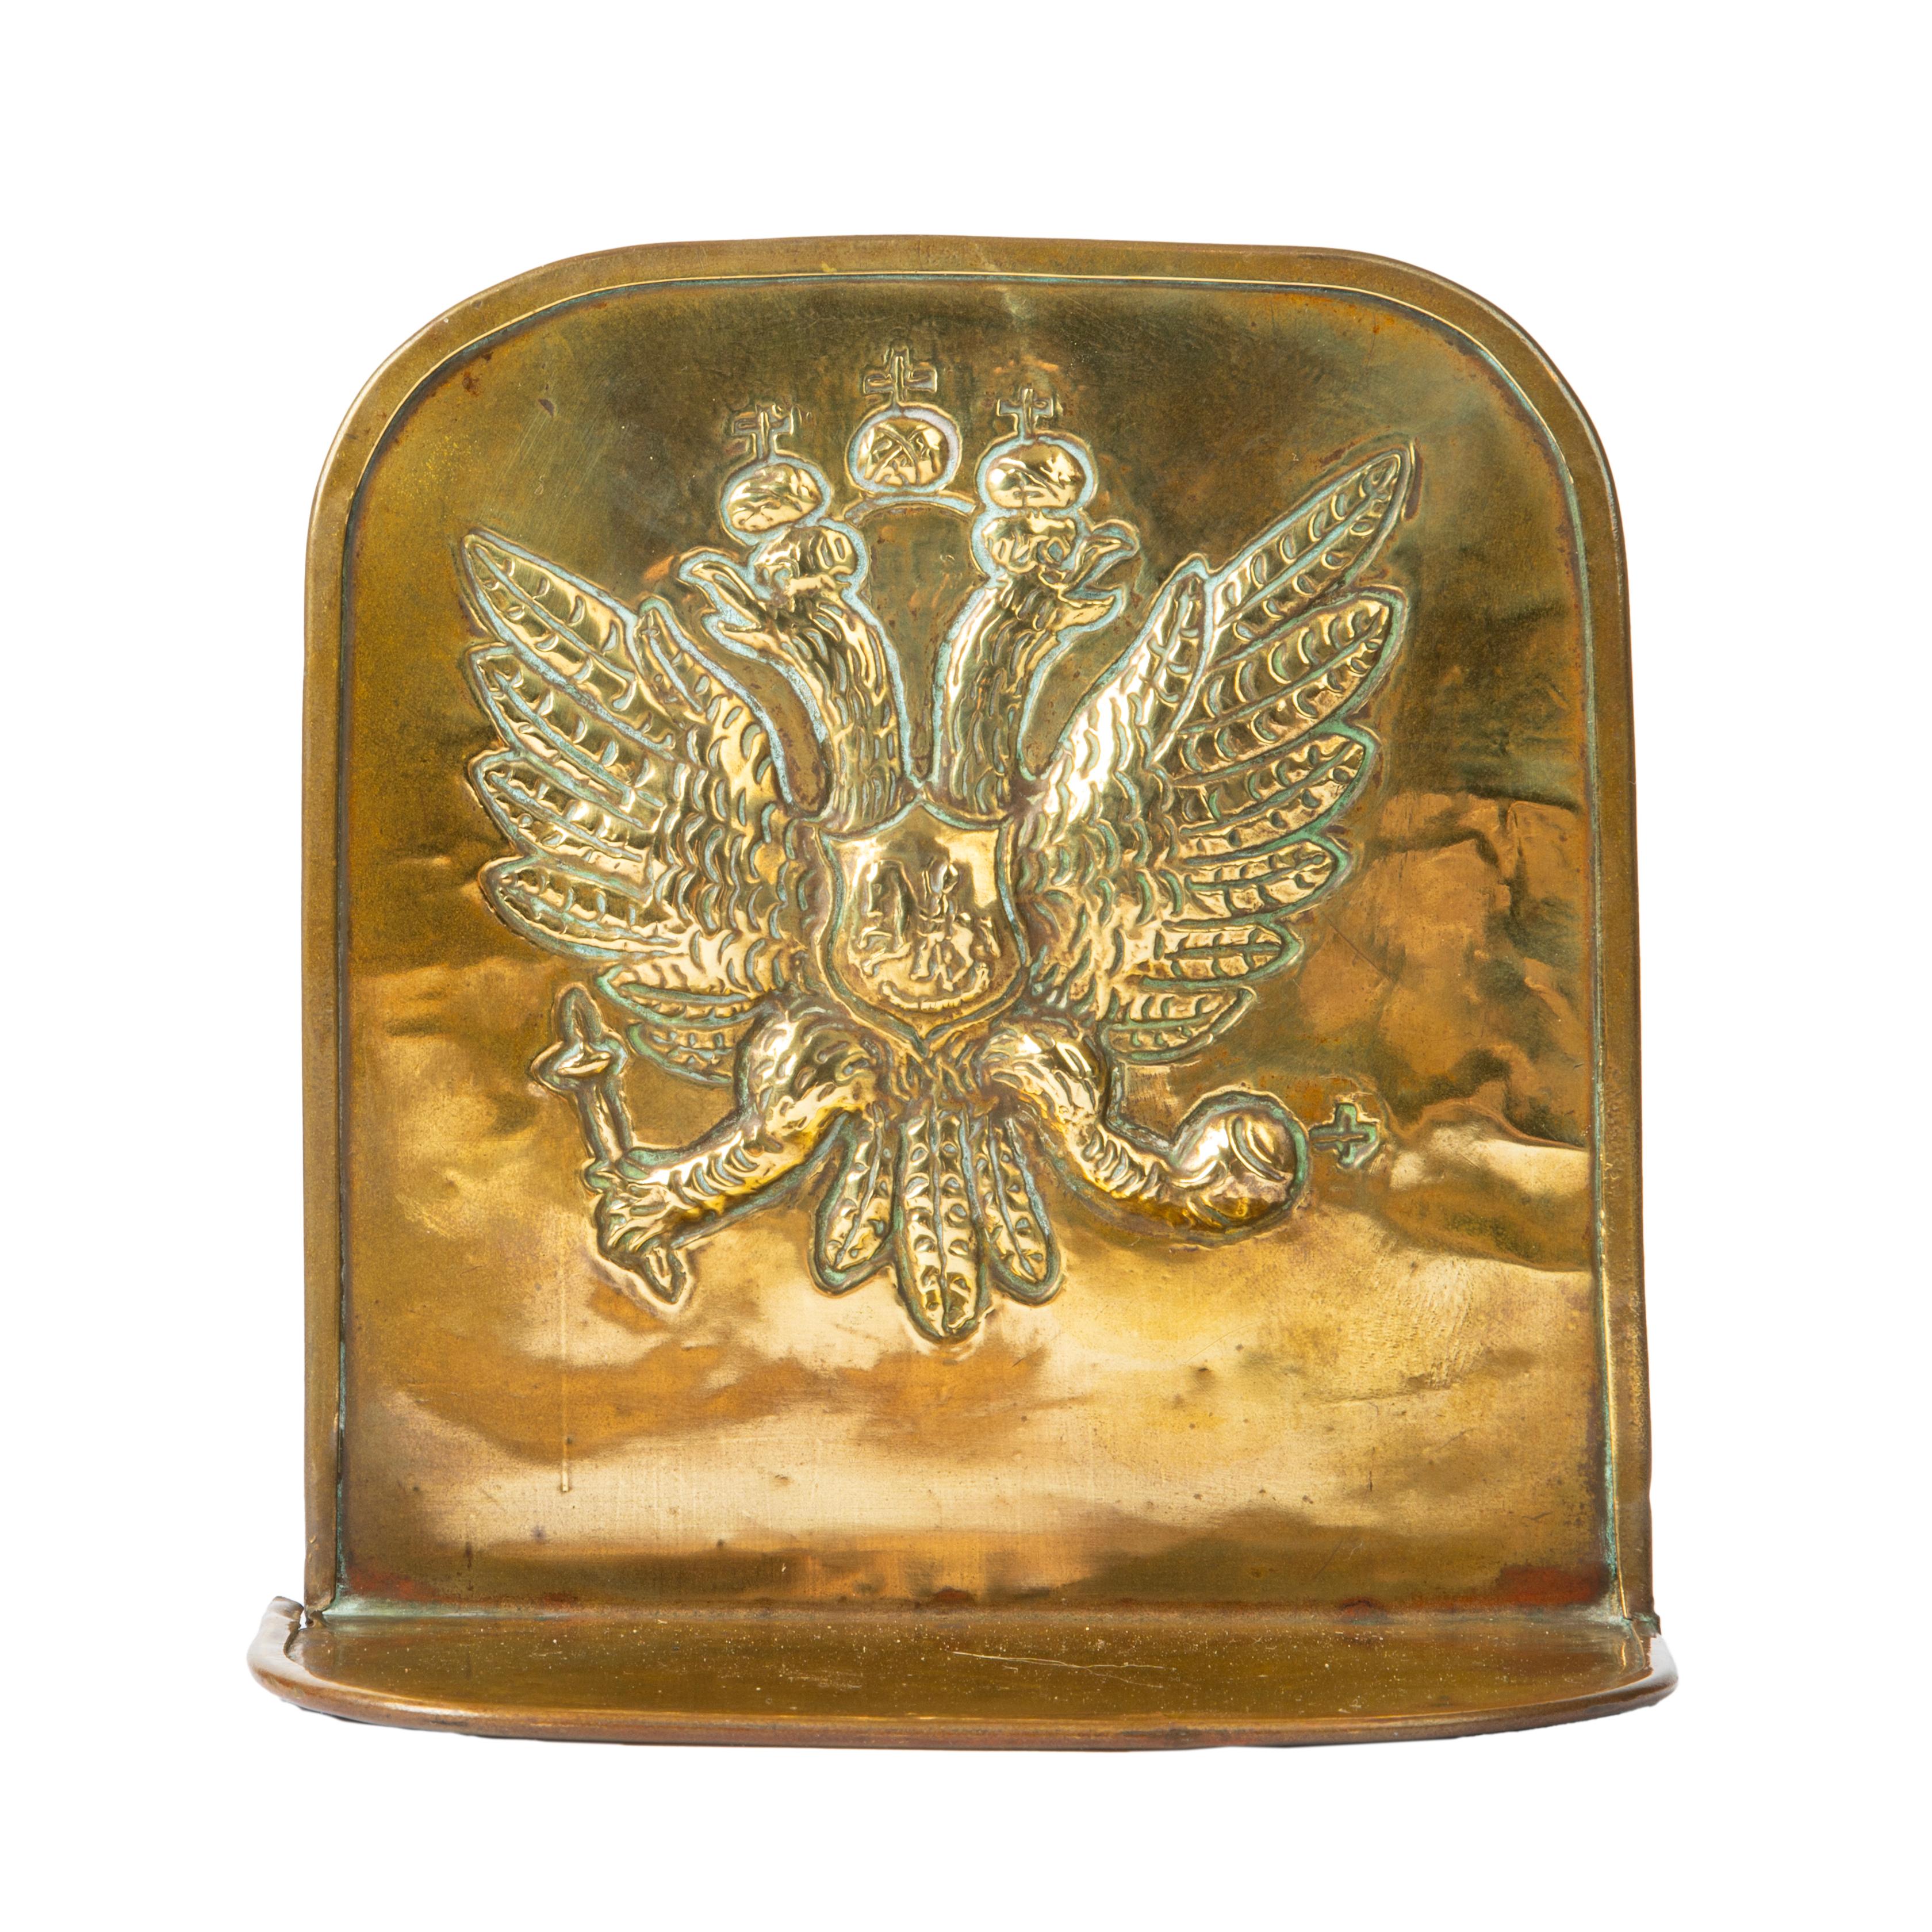 A perfect addition to your imperial library, the center of this Russian brass bookend features a stylized repoussé Romanov eagle holding orb and scepter, enclosing the shield of St. George Slaying the Dragon (symbol of Moscow) below three Romanov